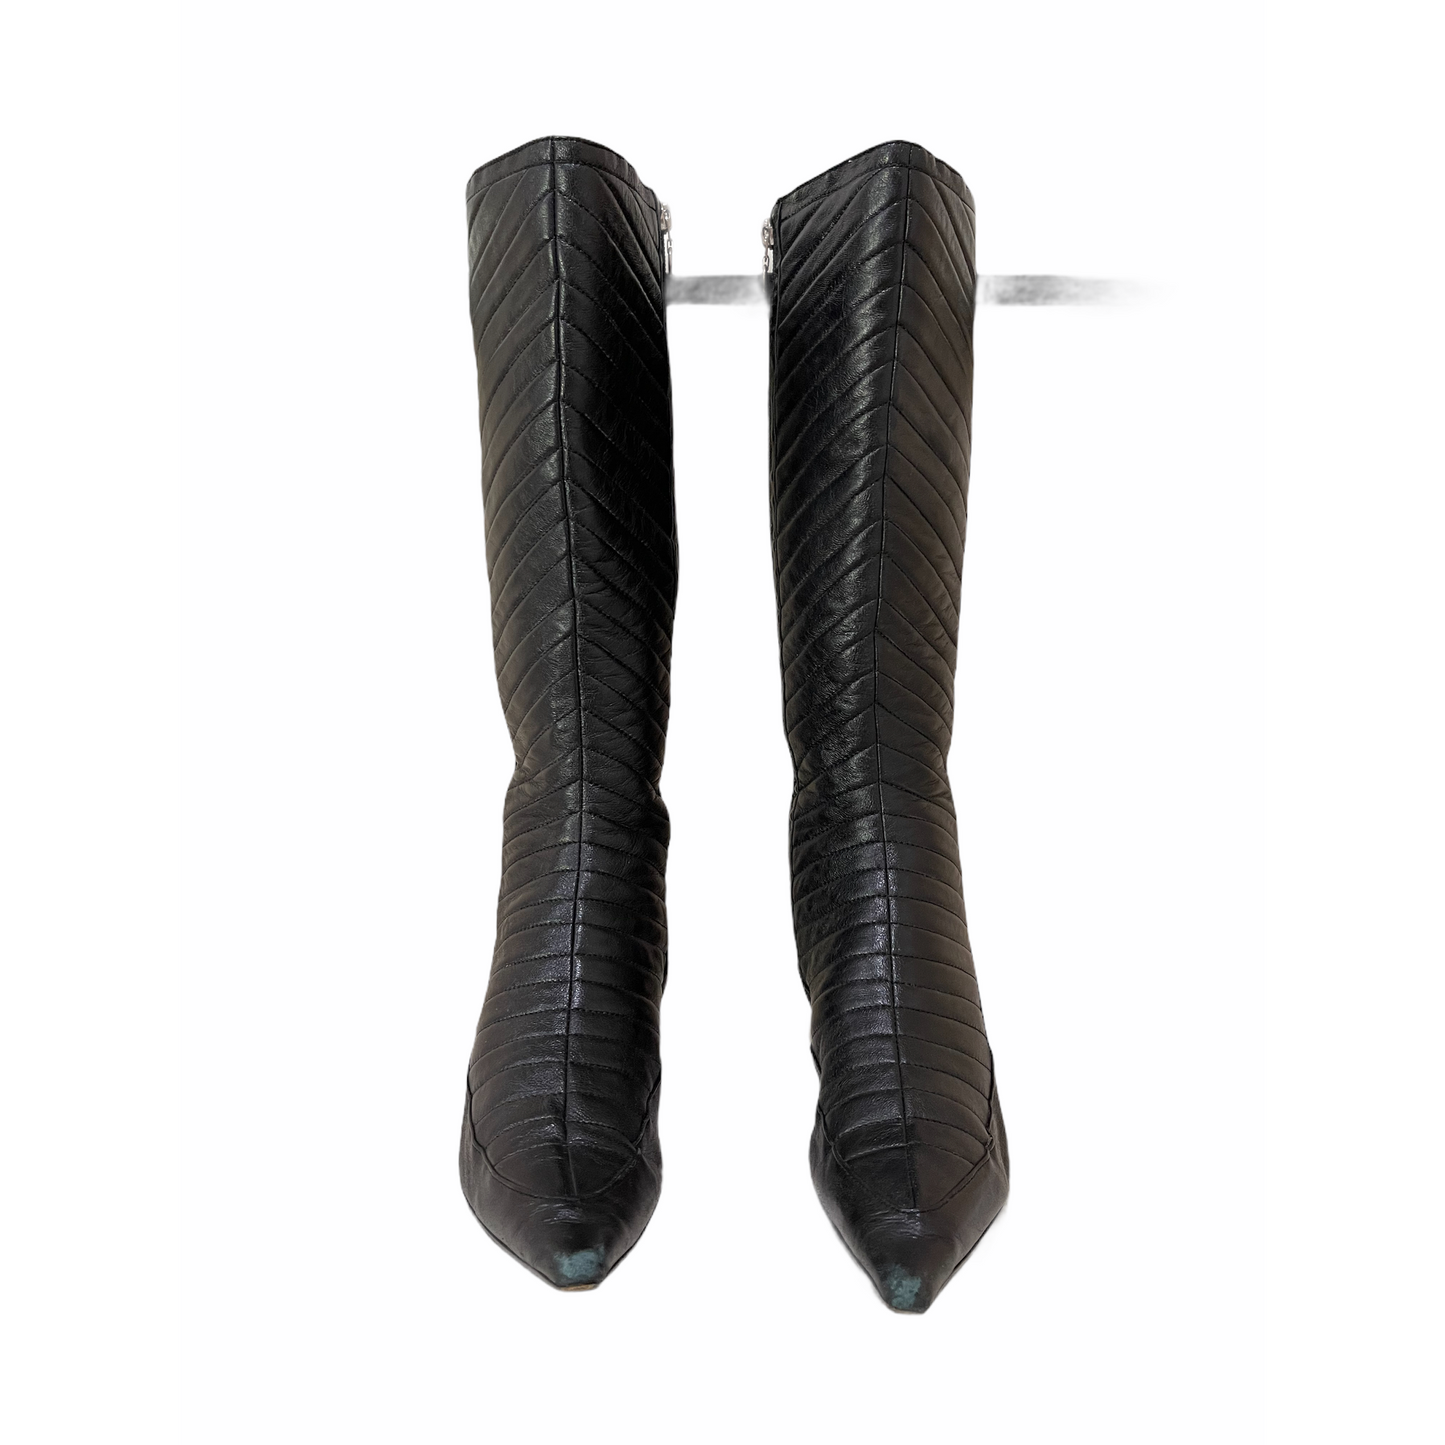 Heeled Boots-Ribbed Design-Black Leather Material-By Constanca Basto